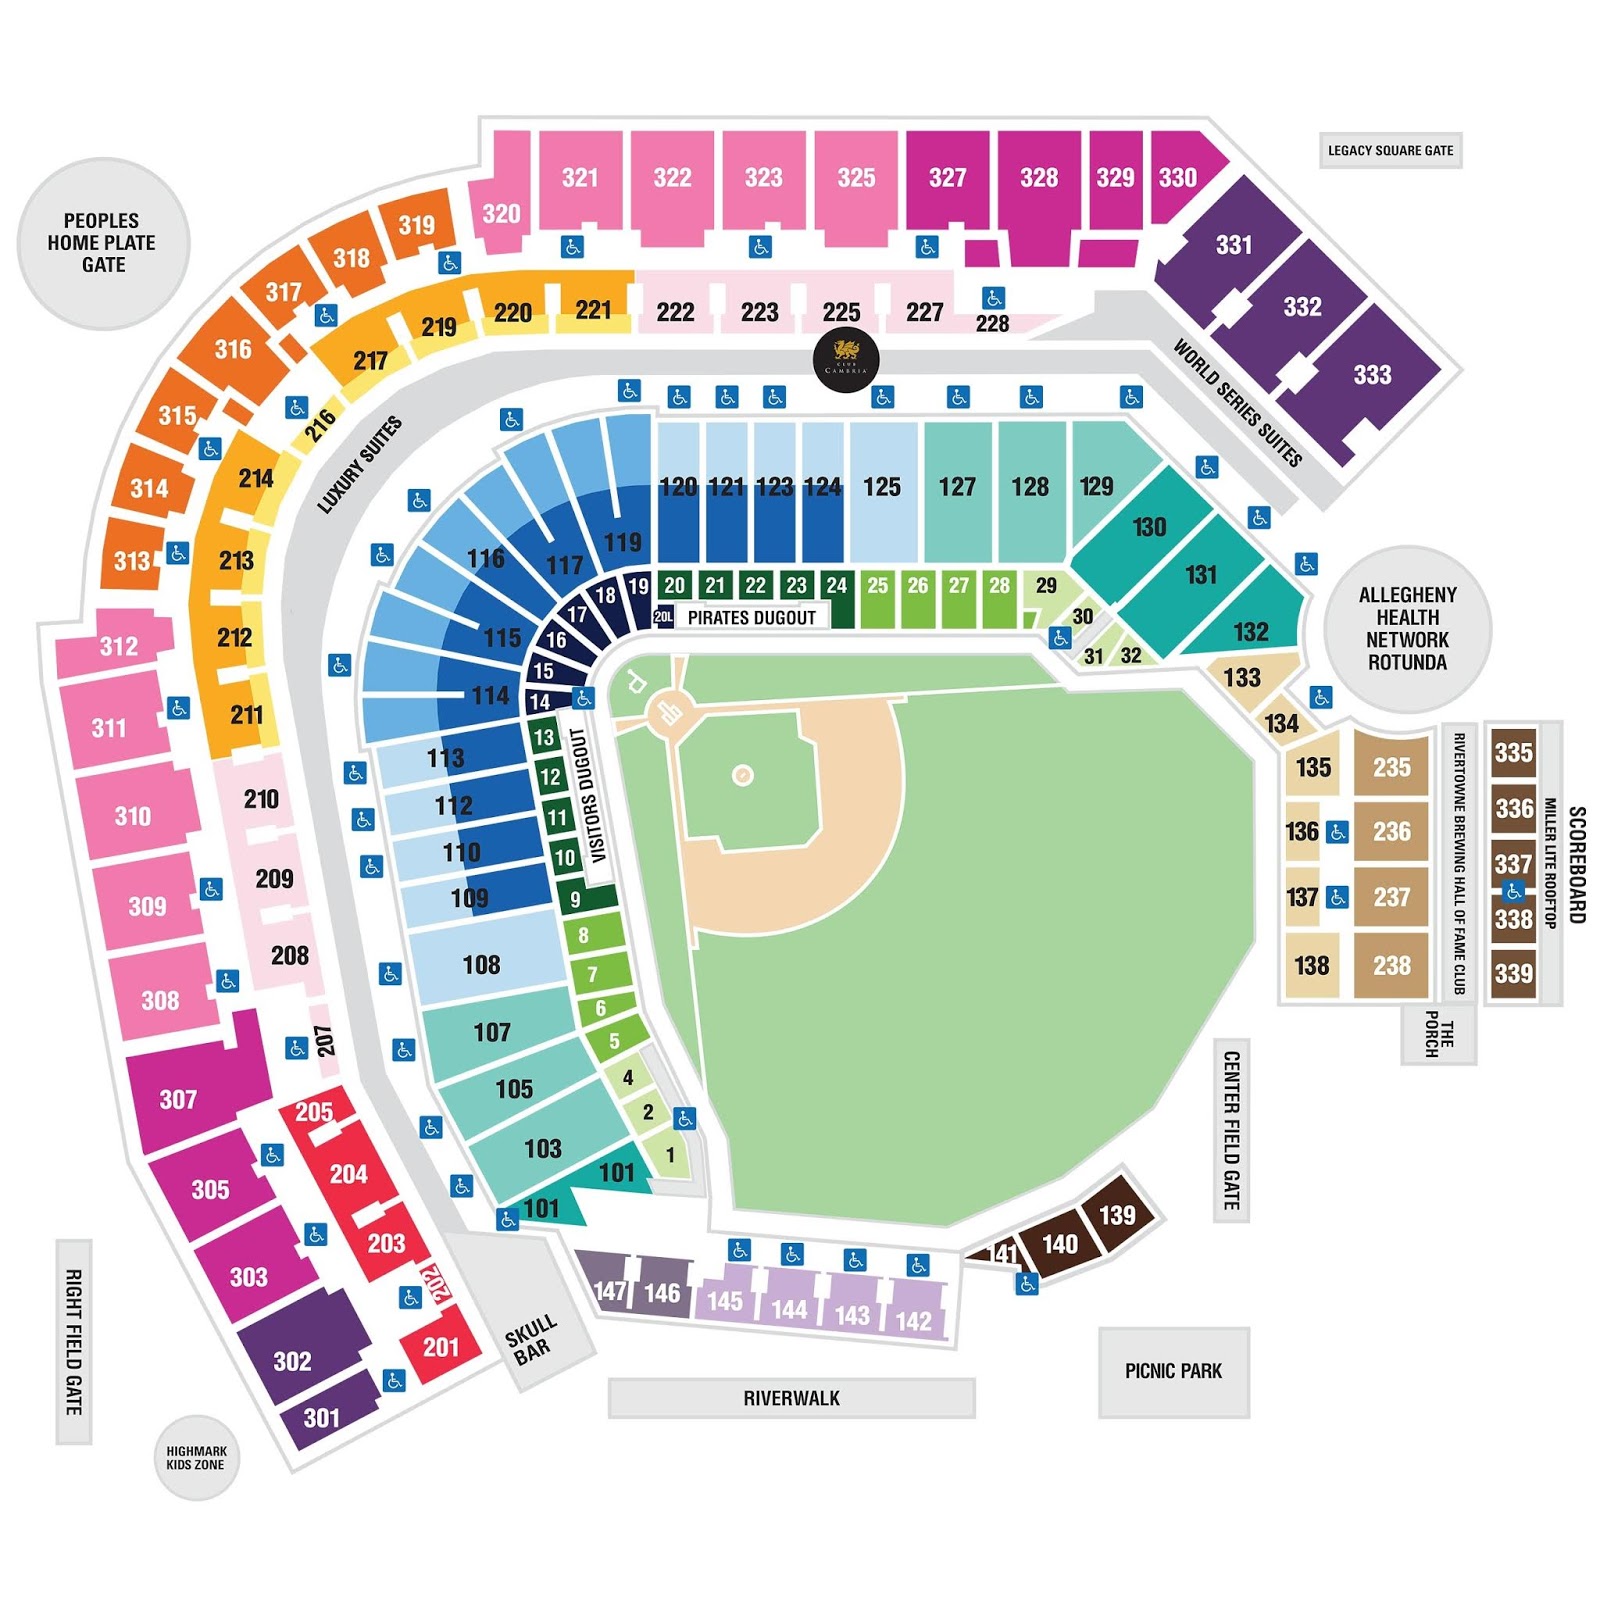 Elegant Pnc Park Seating Chart with seat numbers - Seating Chart